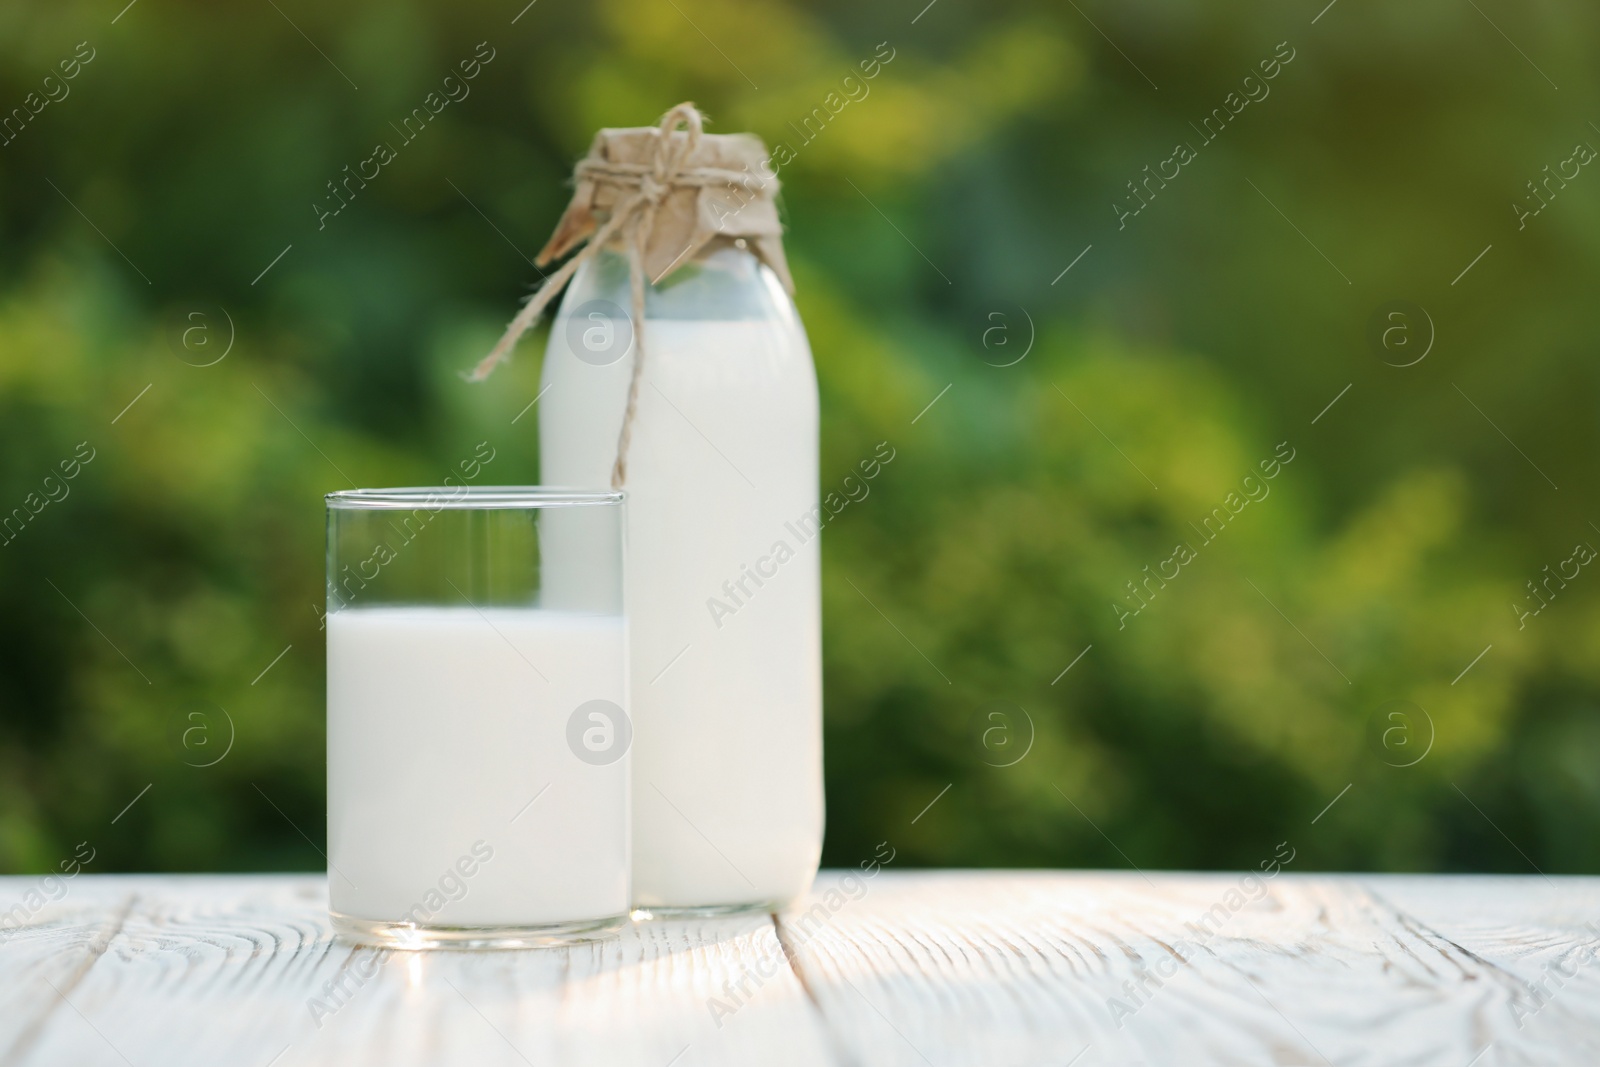 Photo of Bottle and glass of tasty fresh milk on white wooden table against blurred background, space for text